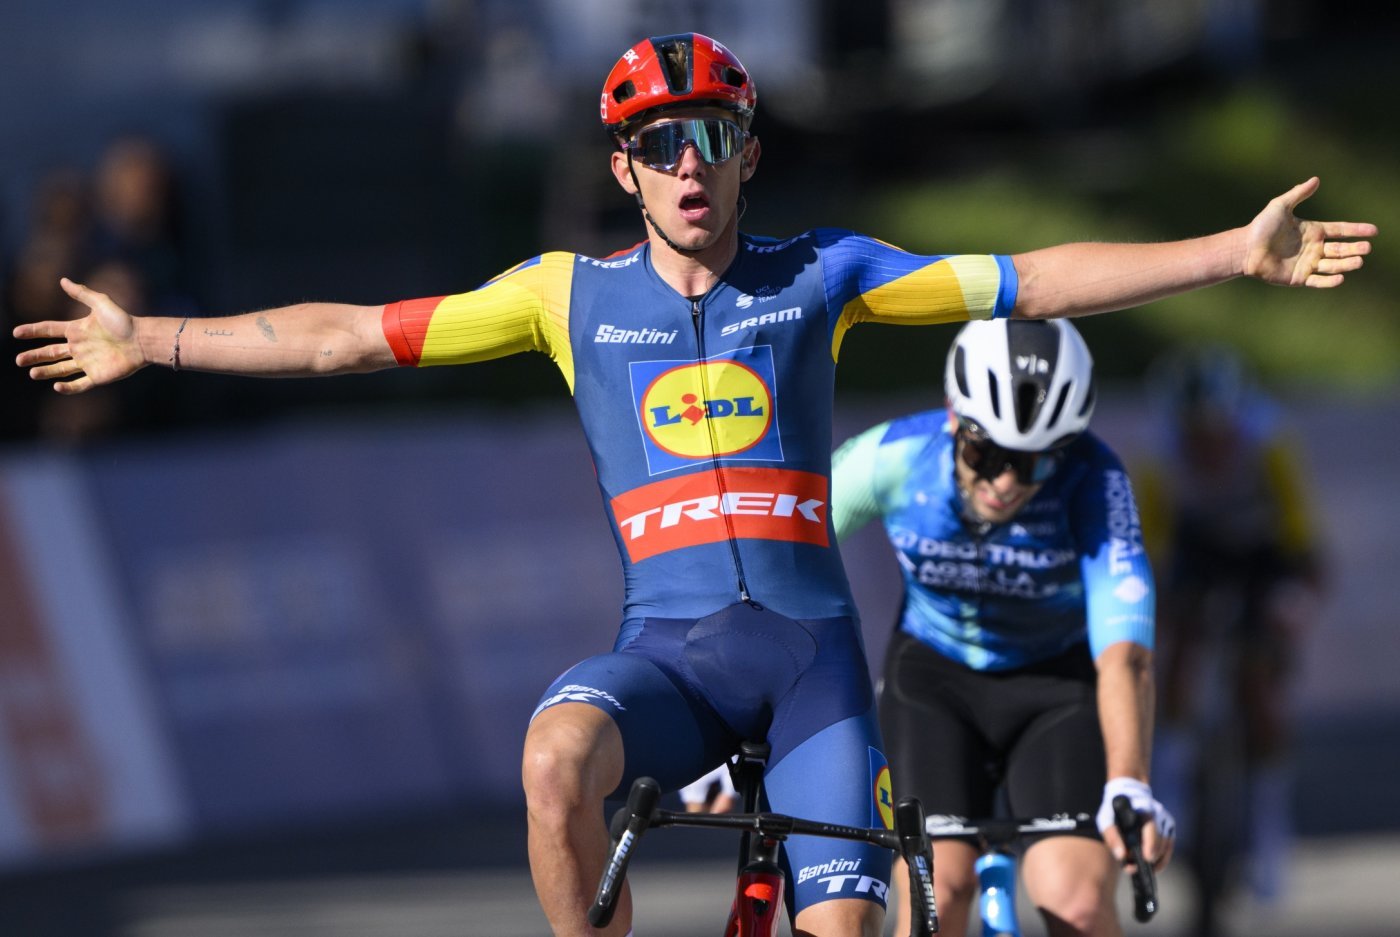 Thibau Nys, left, from Belgium of team Lidl-Trek raises his arms after crossing the finish line to win in front the second placed Andrea Vendrame, right, from Italy of team Decathlon AG2R La Mondiale the second stage, a 171,02 km race between Fribourg and Salvan / Les Marecottes at the 77th Tour de Romandie UCI World Tour Cycling race, in Salvan, Switzerland, Thursday, April 25, 2024. (KEYSTONE/Laurent Gillieron)